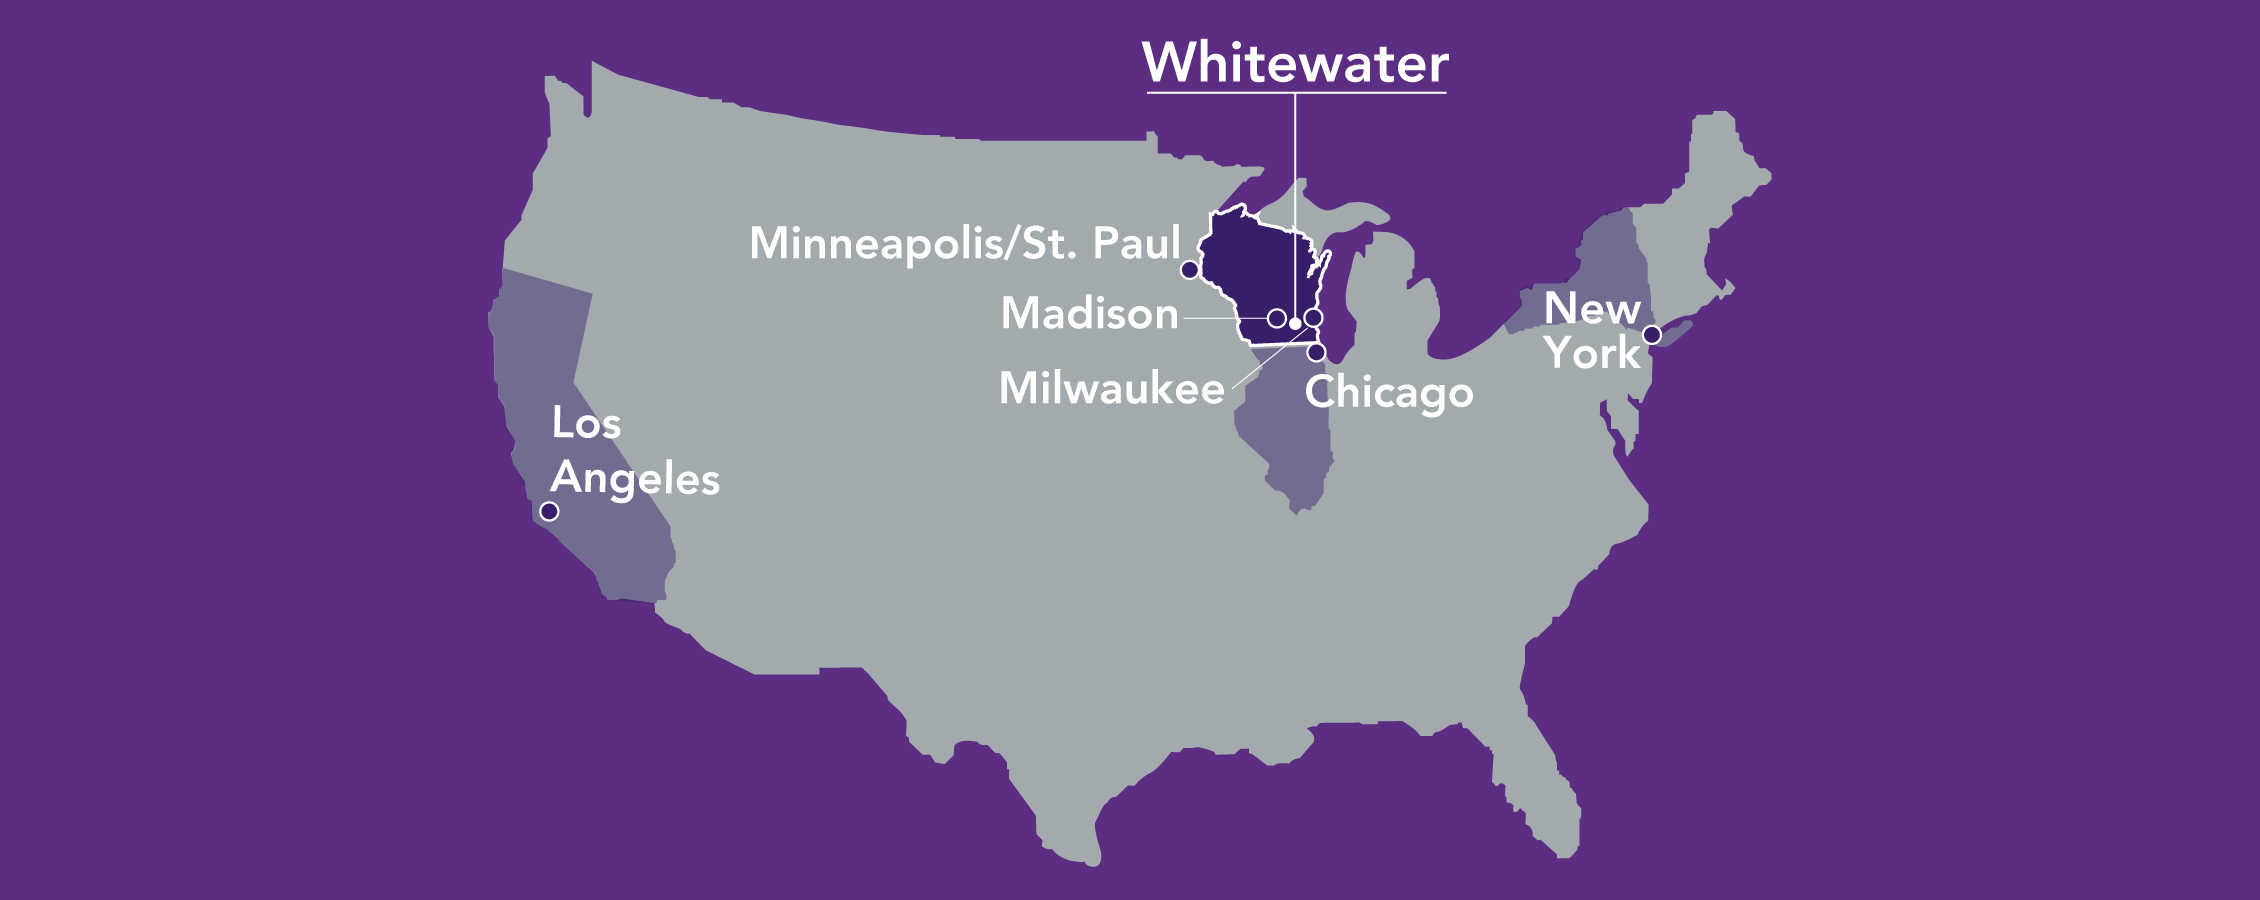 A graphic of the United States showing locations for Los Angeles, Minneapolis, Madison, Milwaukee, Chicago, Whitewater and New York.